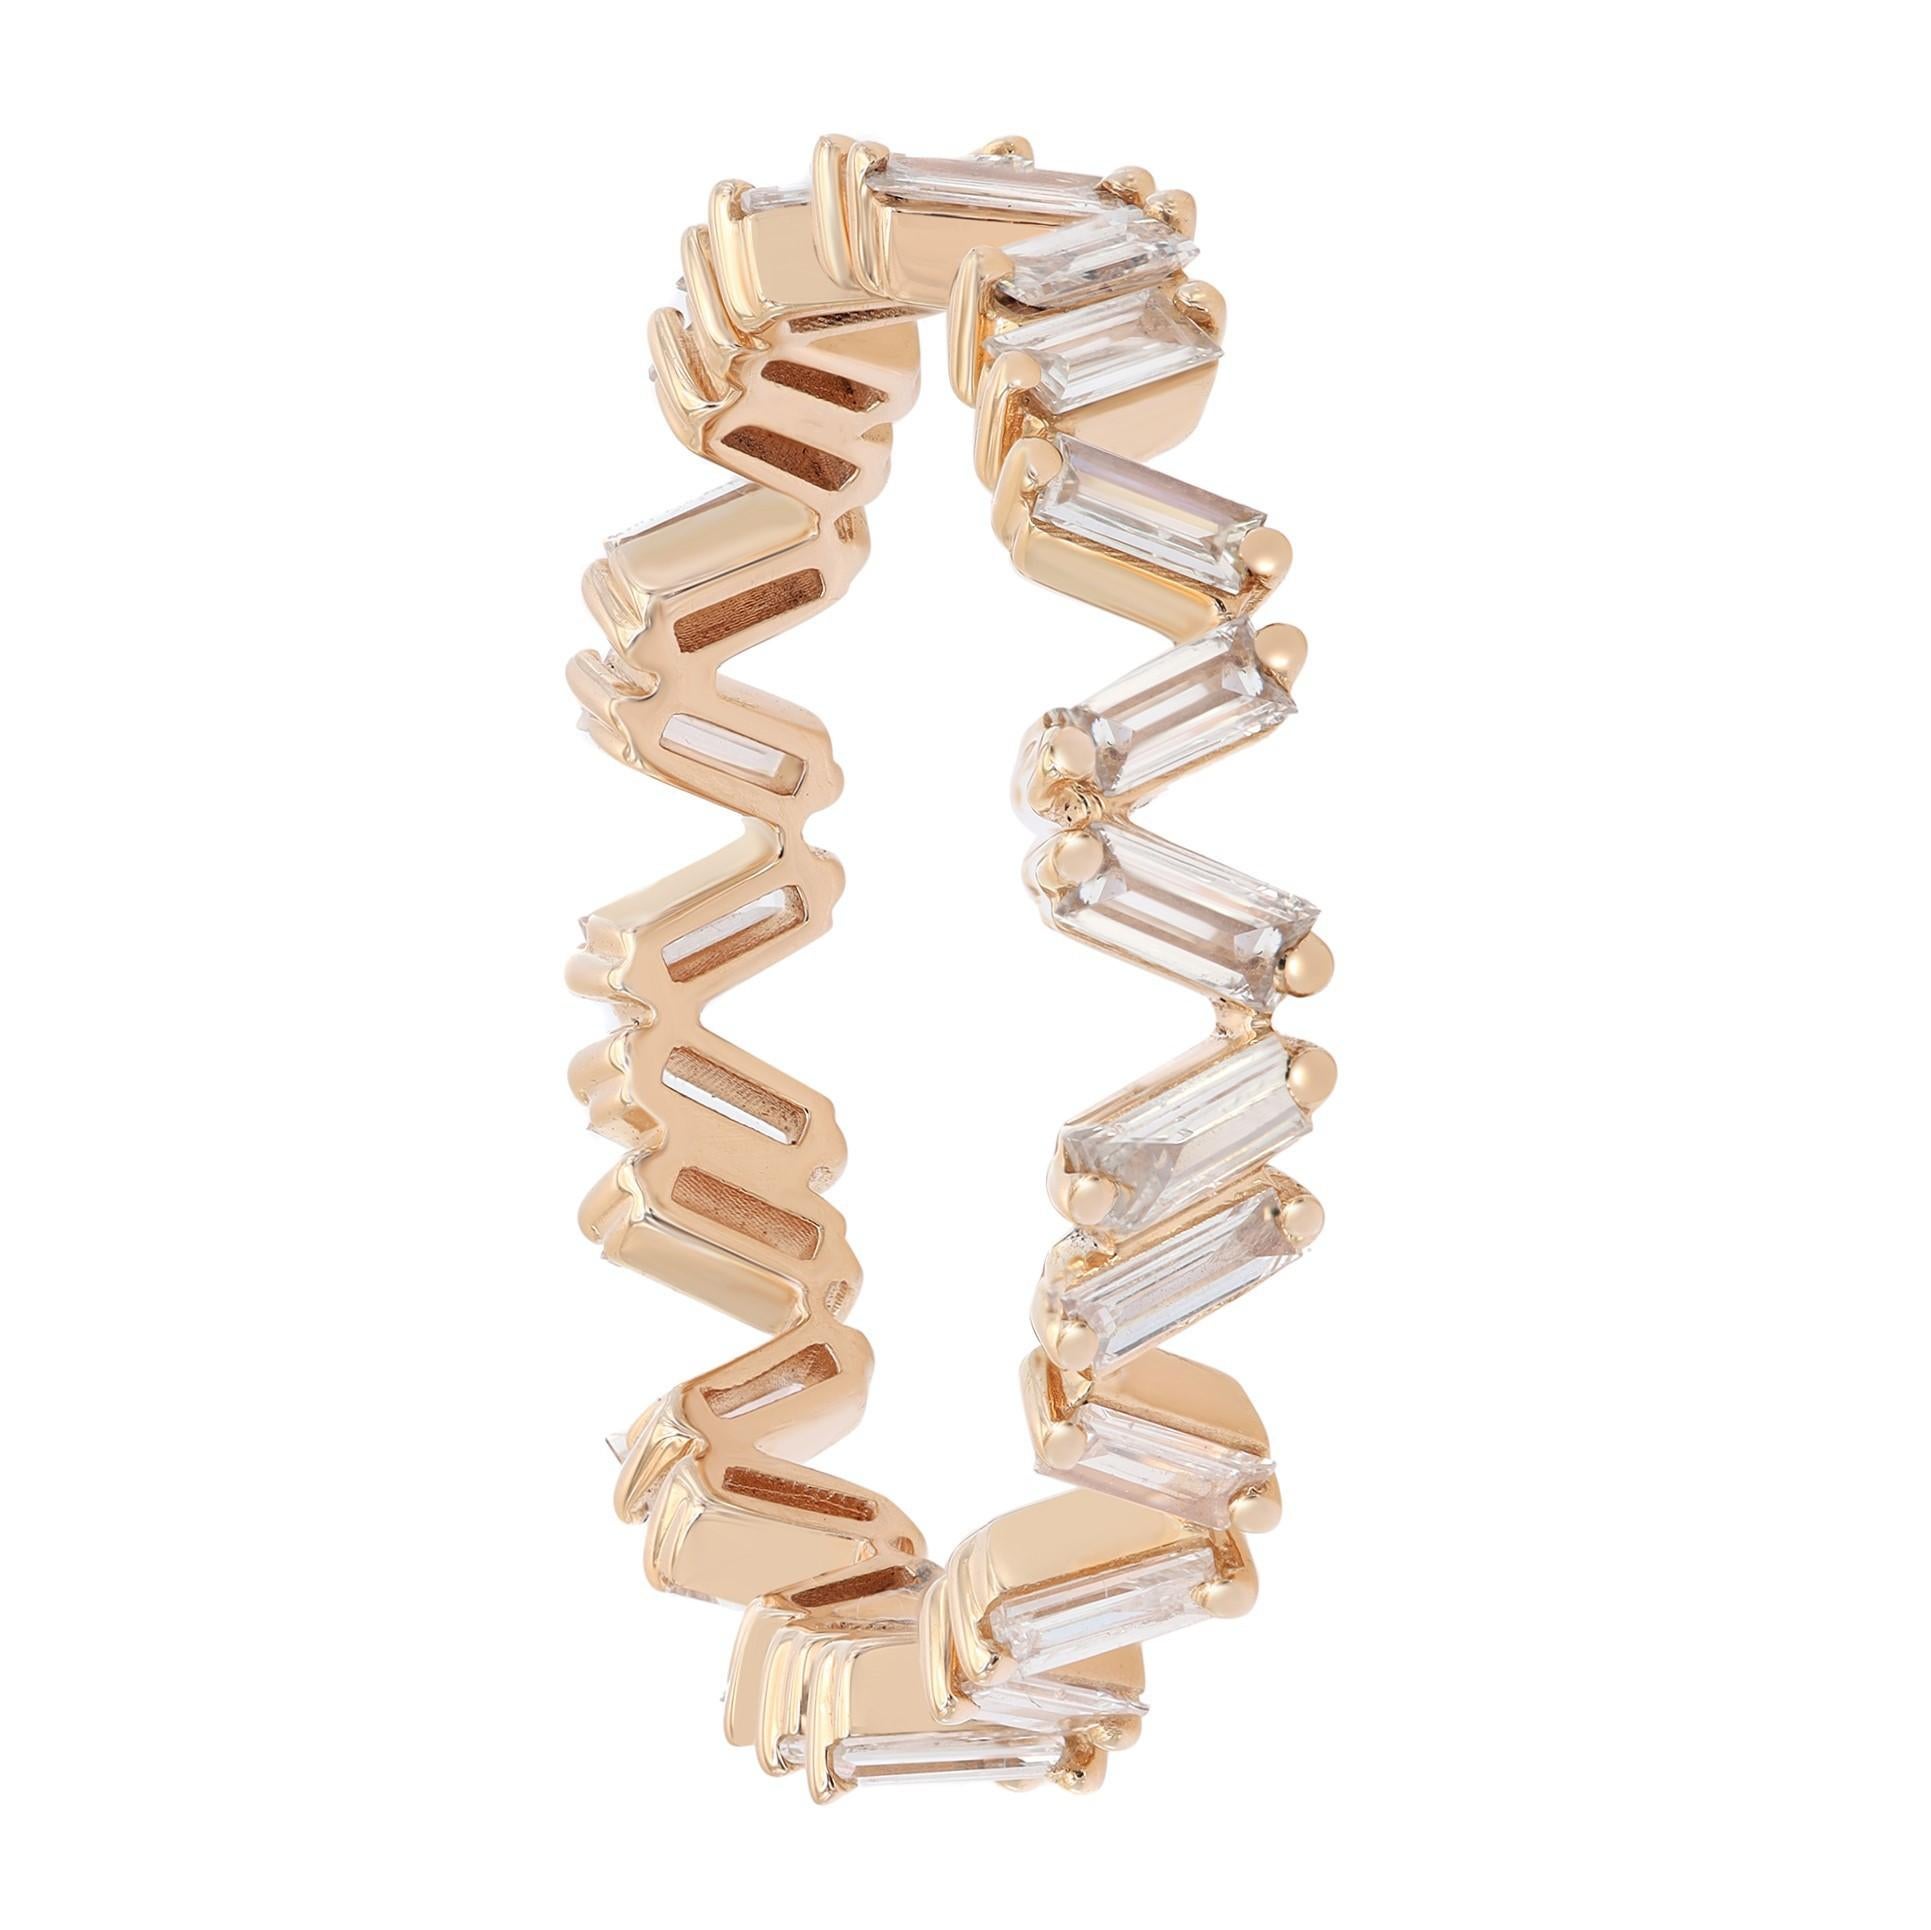 Sparkle with this 14k rose gold diamond eternity band. This ring features 25 prong set Baguette cut diamonds set all through the ring in a zig zag pattern. This ring is perfect for promise ring or stackable rings. Total diamond weight: 0.69 carat.